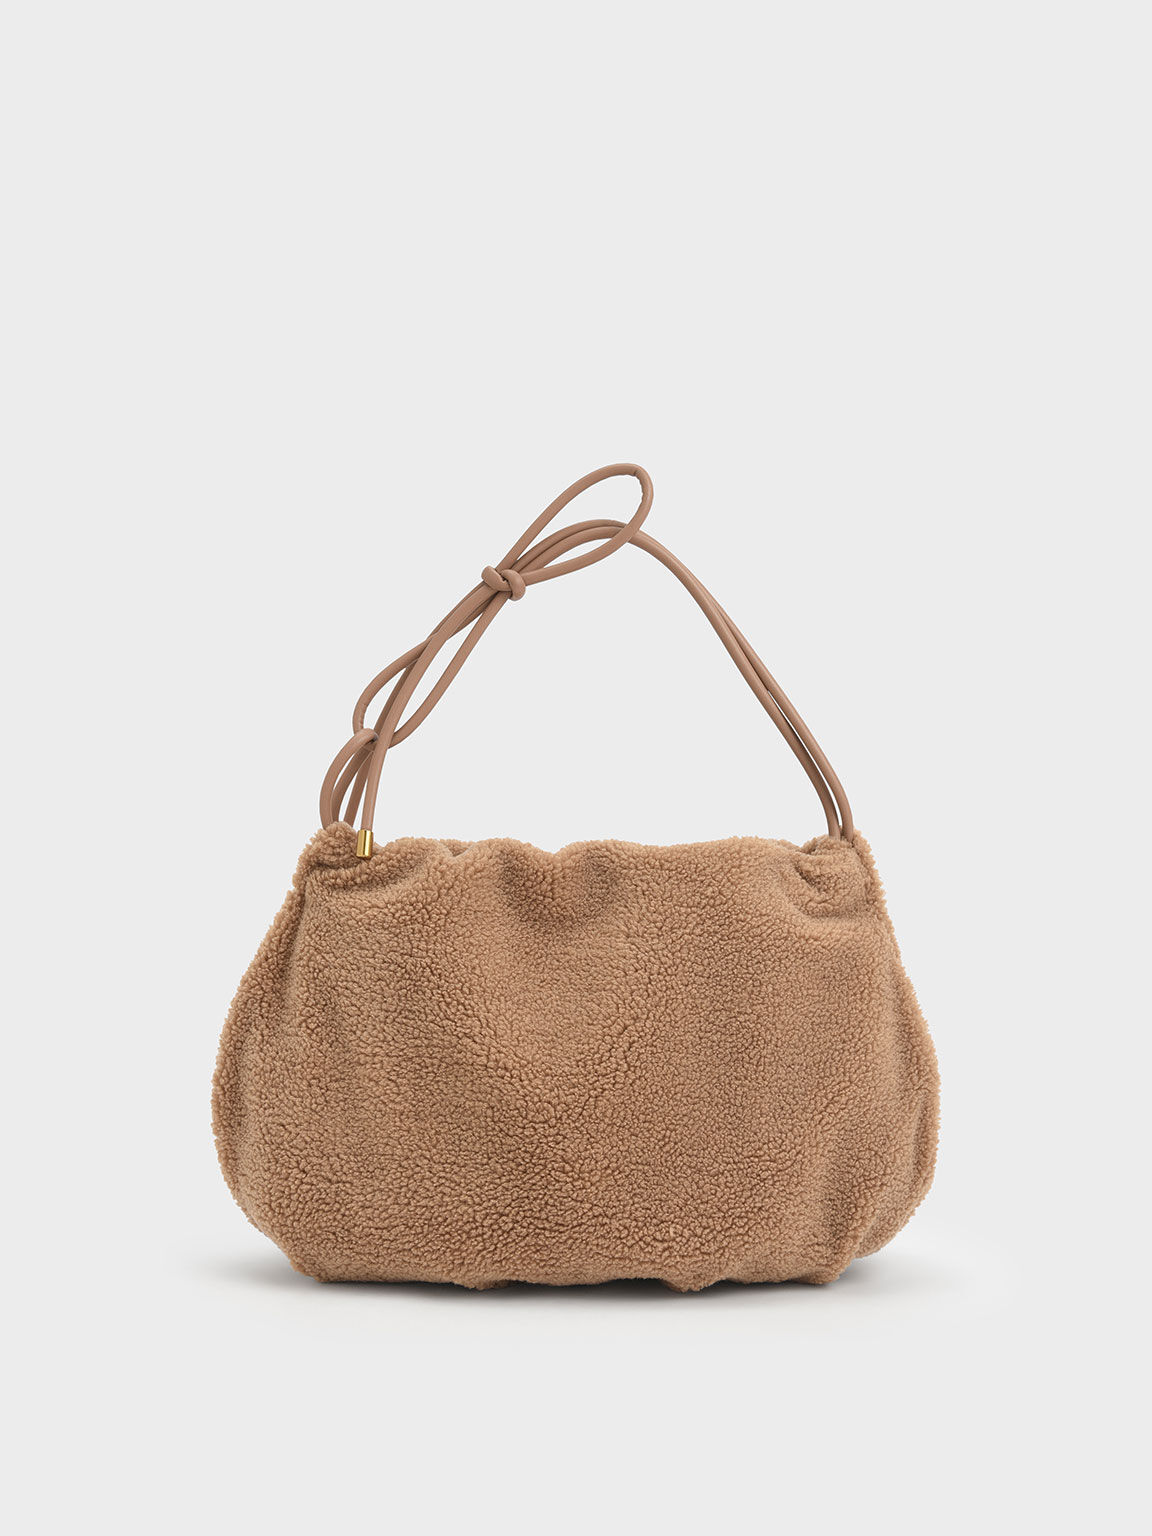  NEW Knotted Handle Textured Hobo Bag - Camel